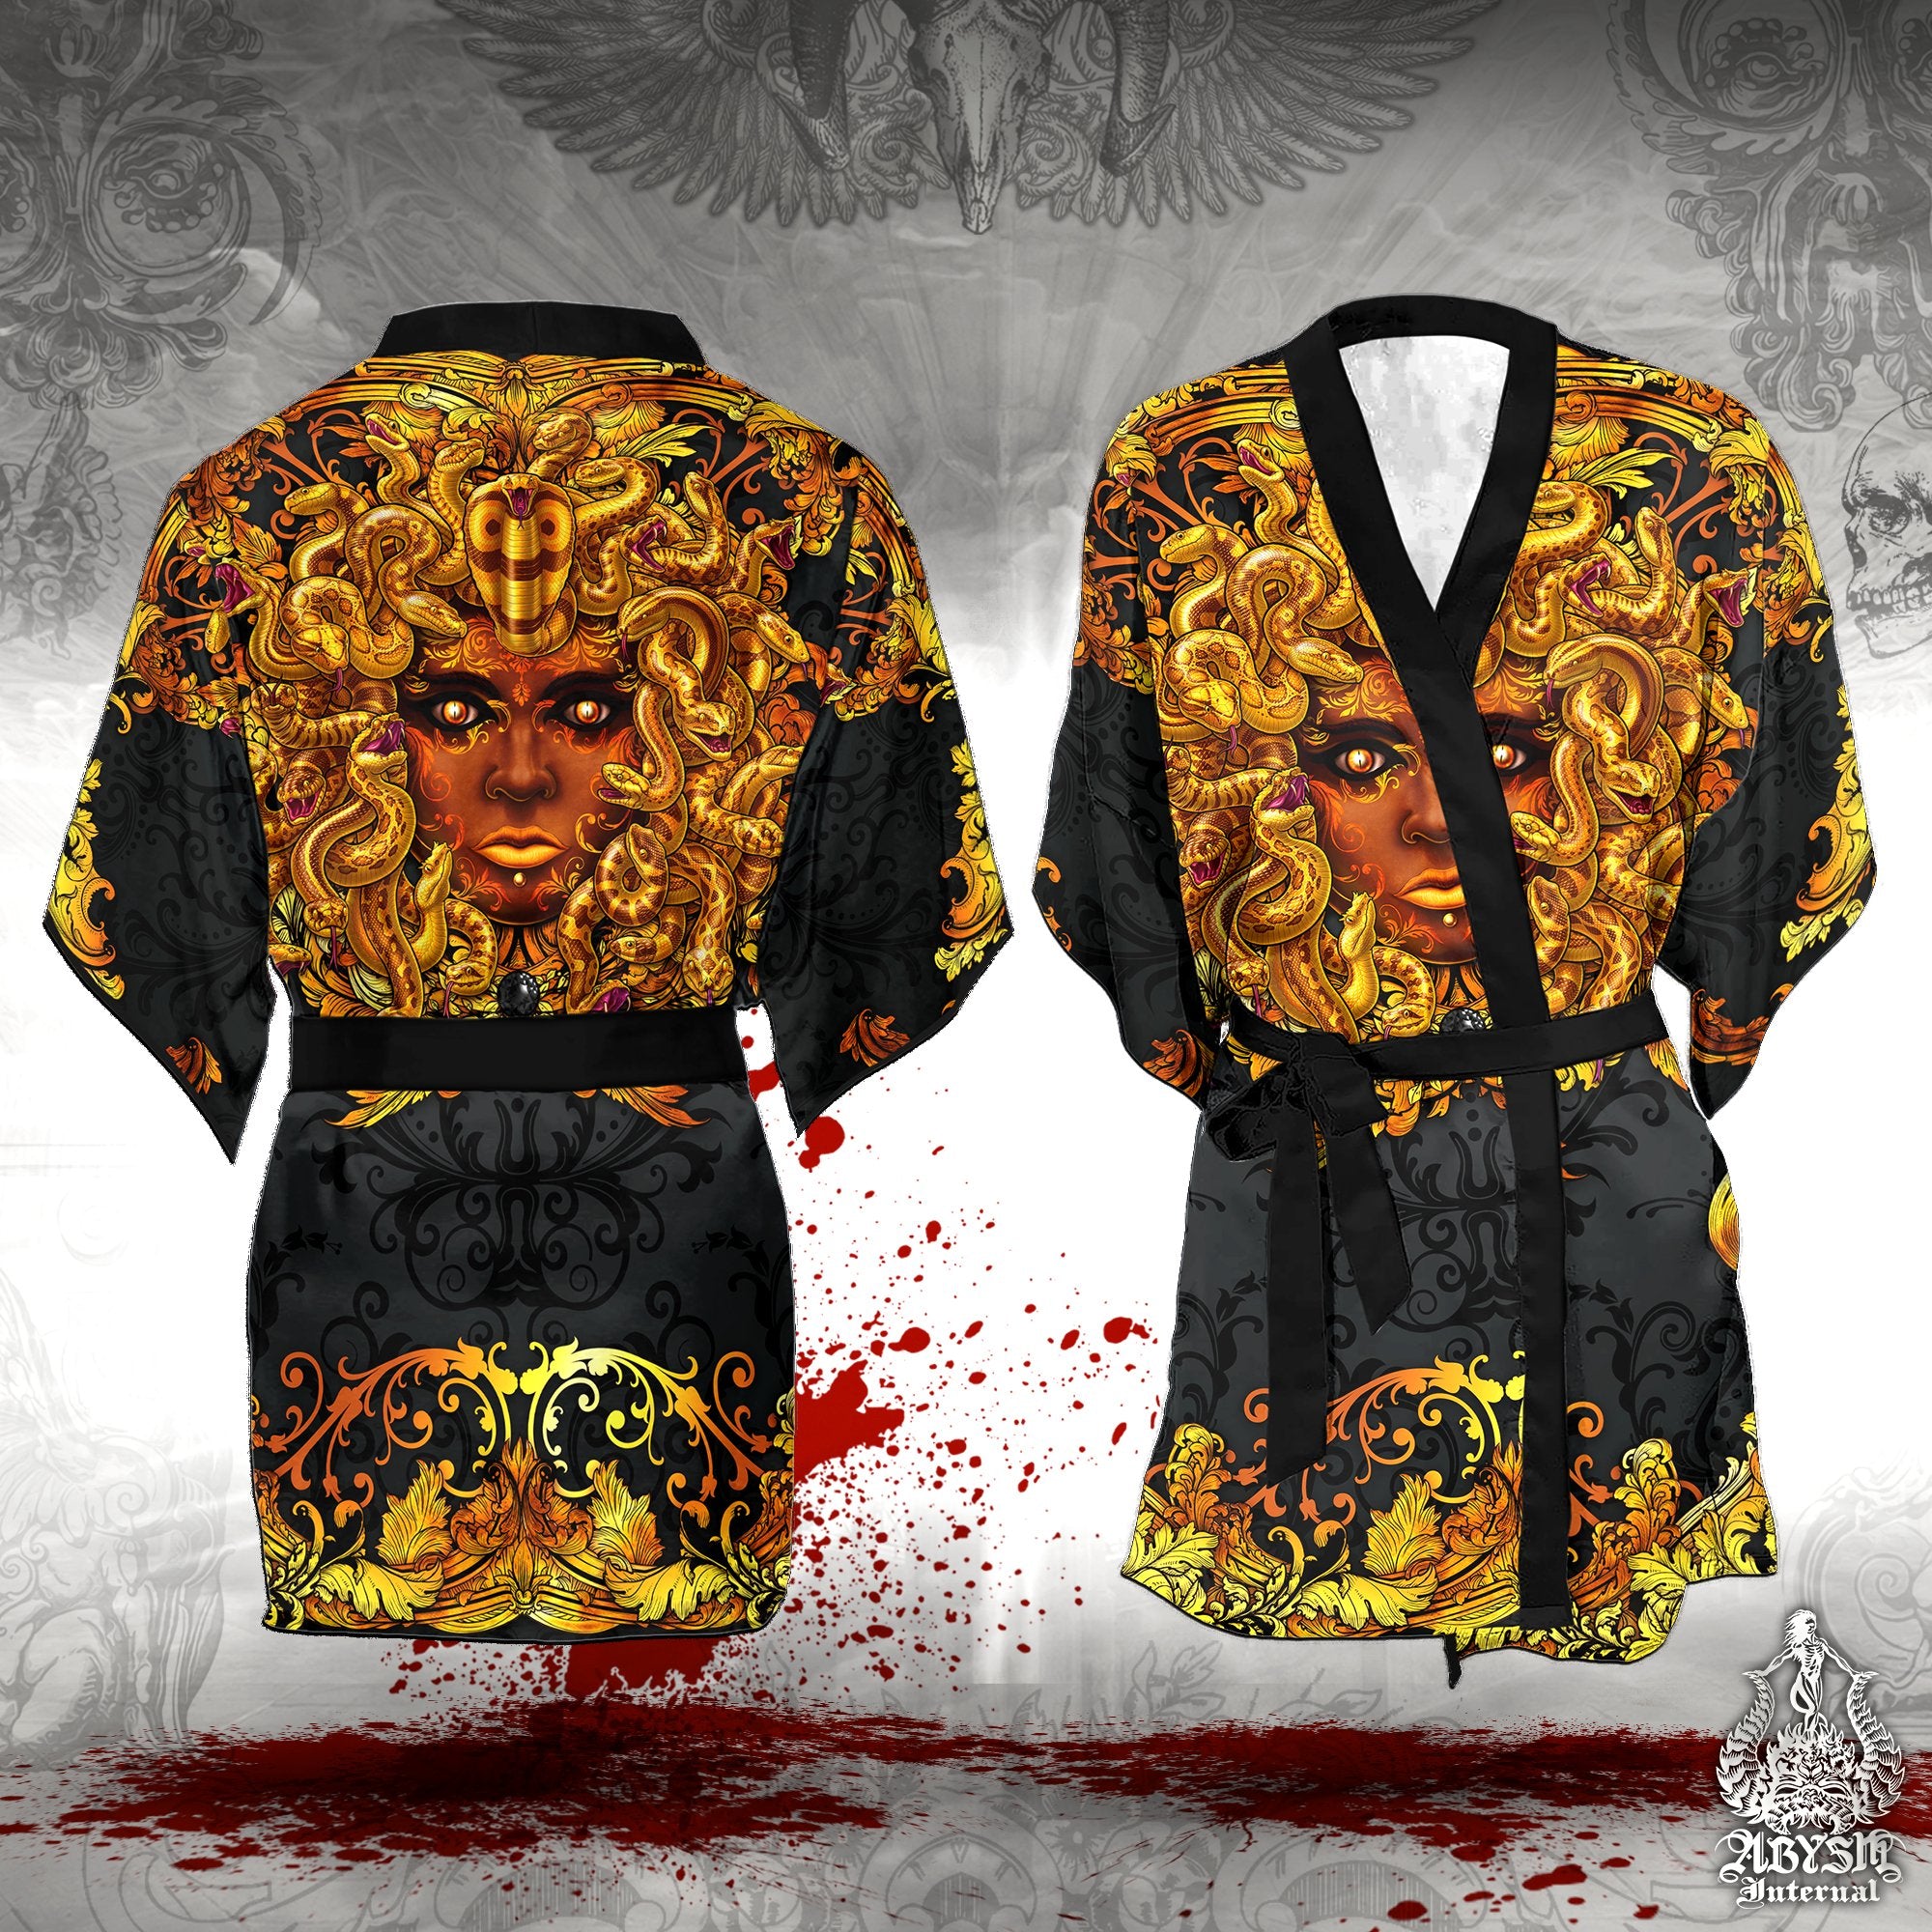 Medusa Skull Short Kimono Robe, Beach Party Outfit, Coverup, Summer Festival, Indie and Alternative Clothing, Unisex - Gold, 2 Faces - Abysm Internal